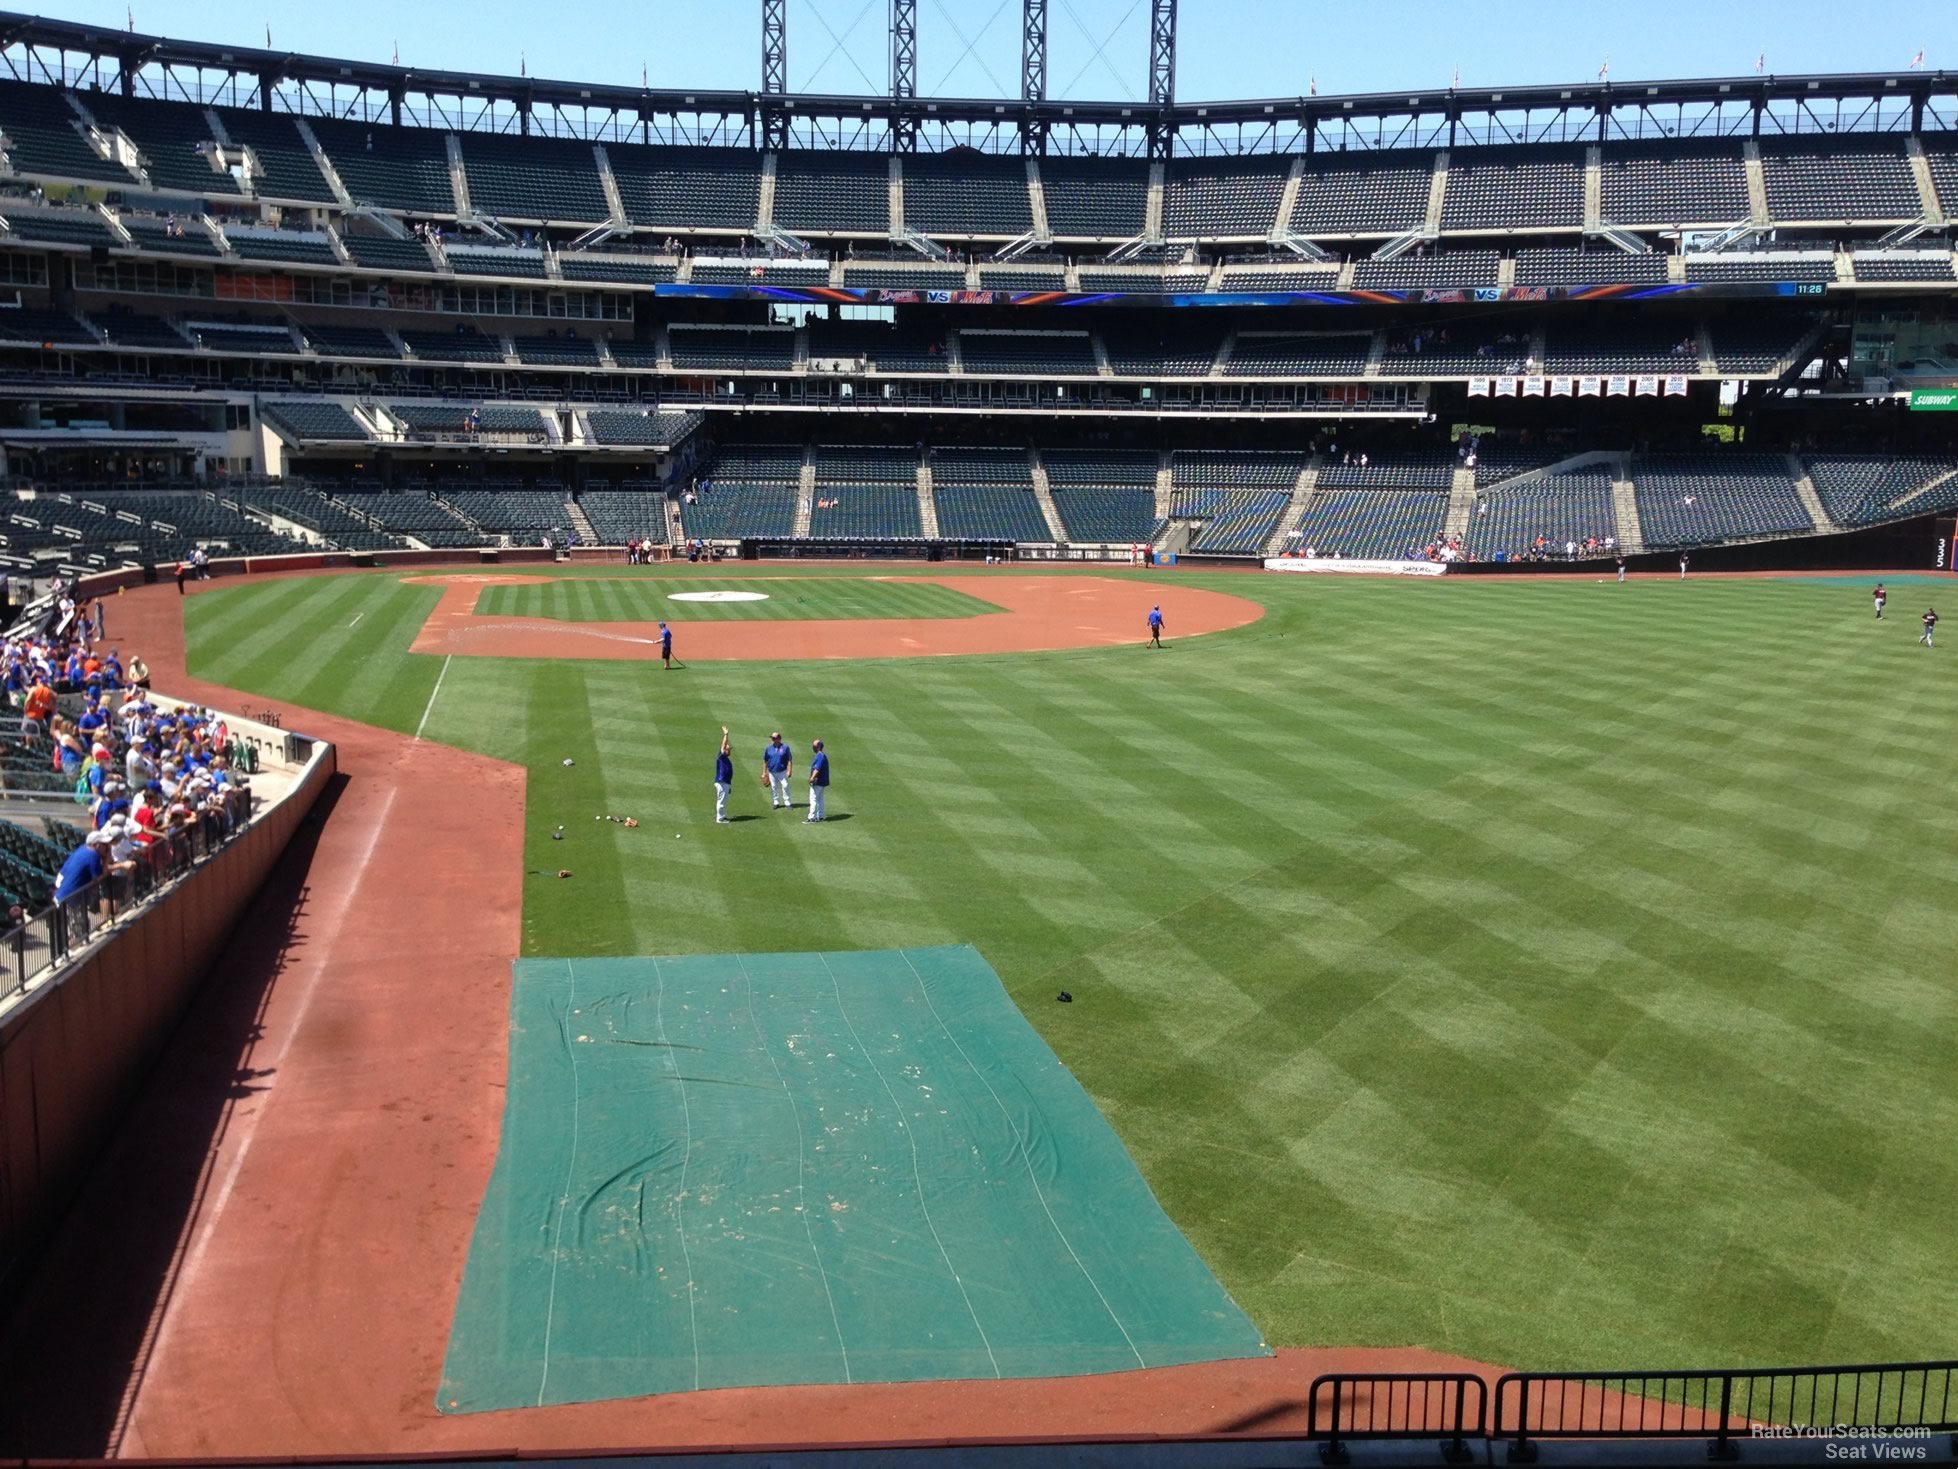 section 103, row 12 seat view  - citi field